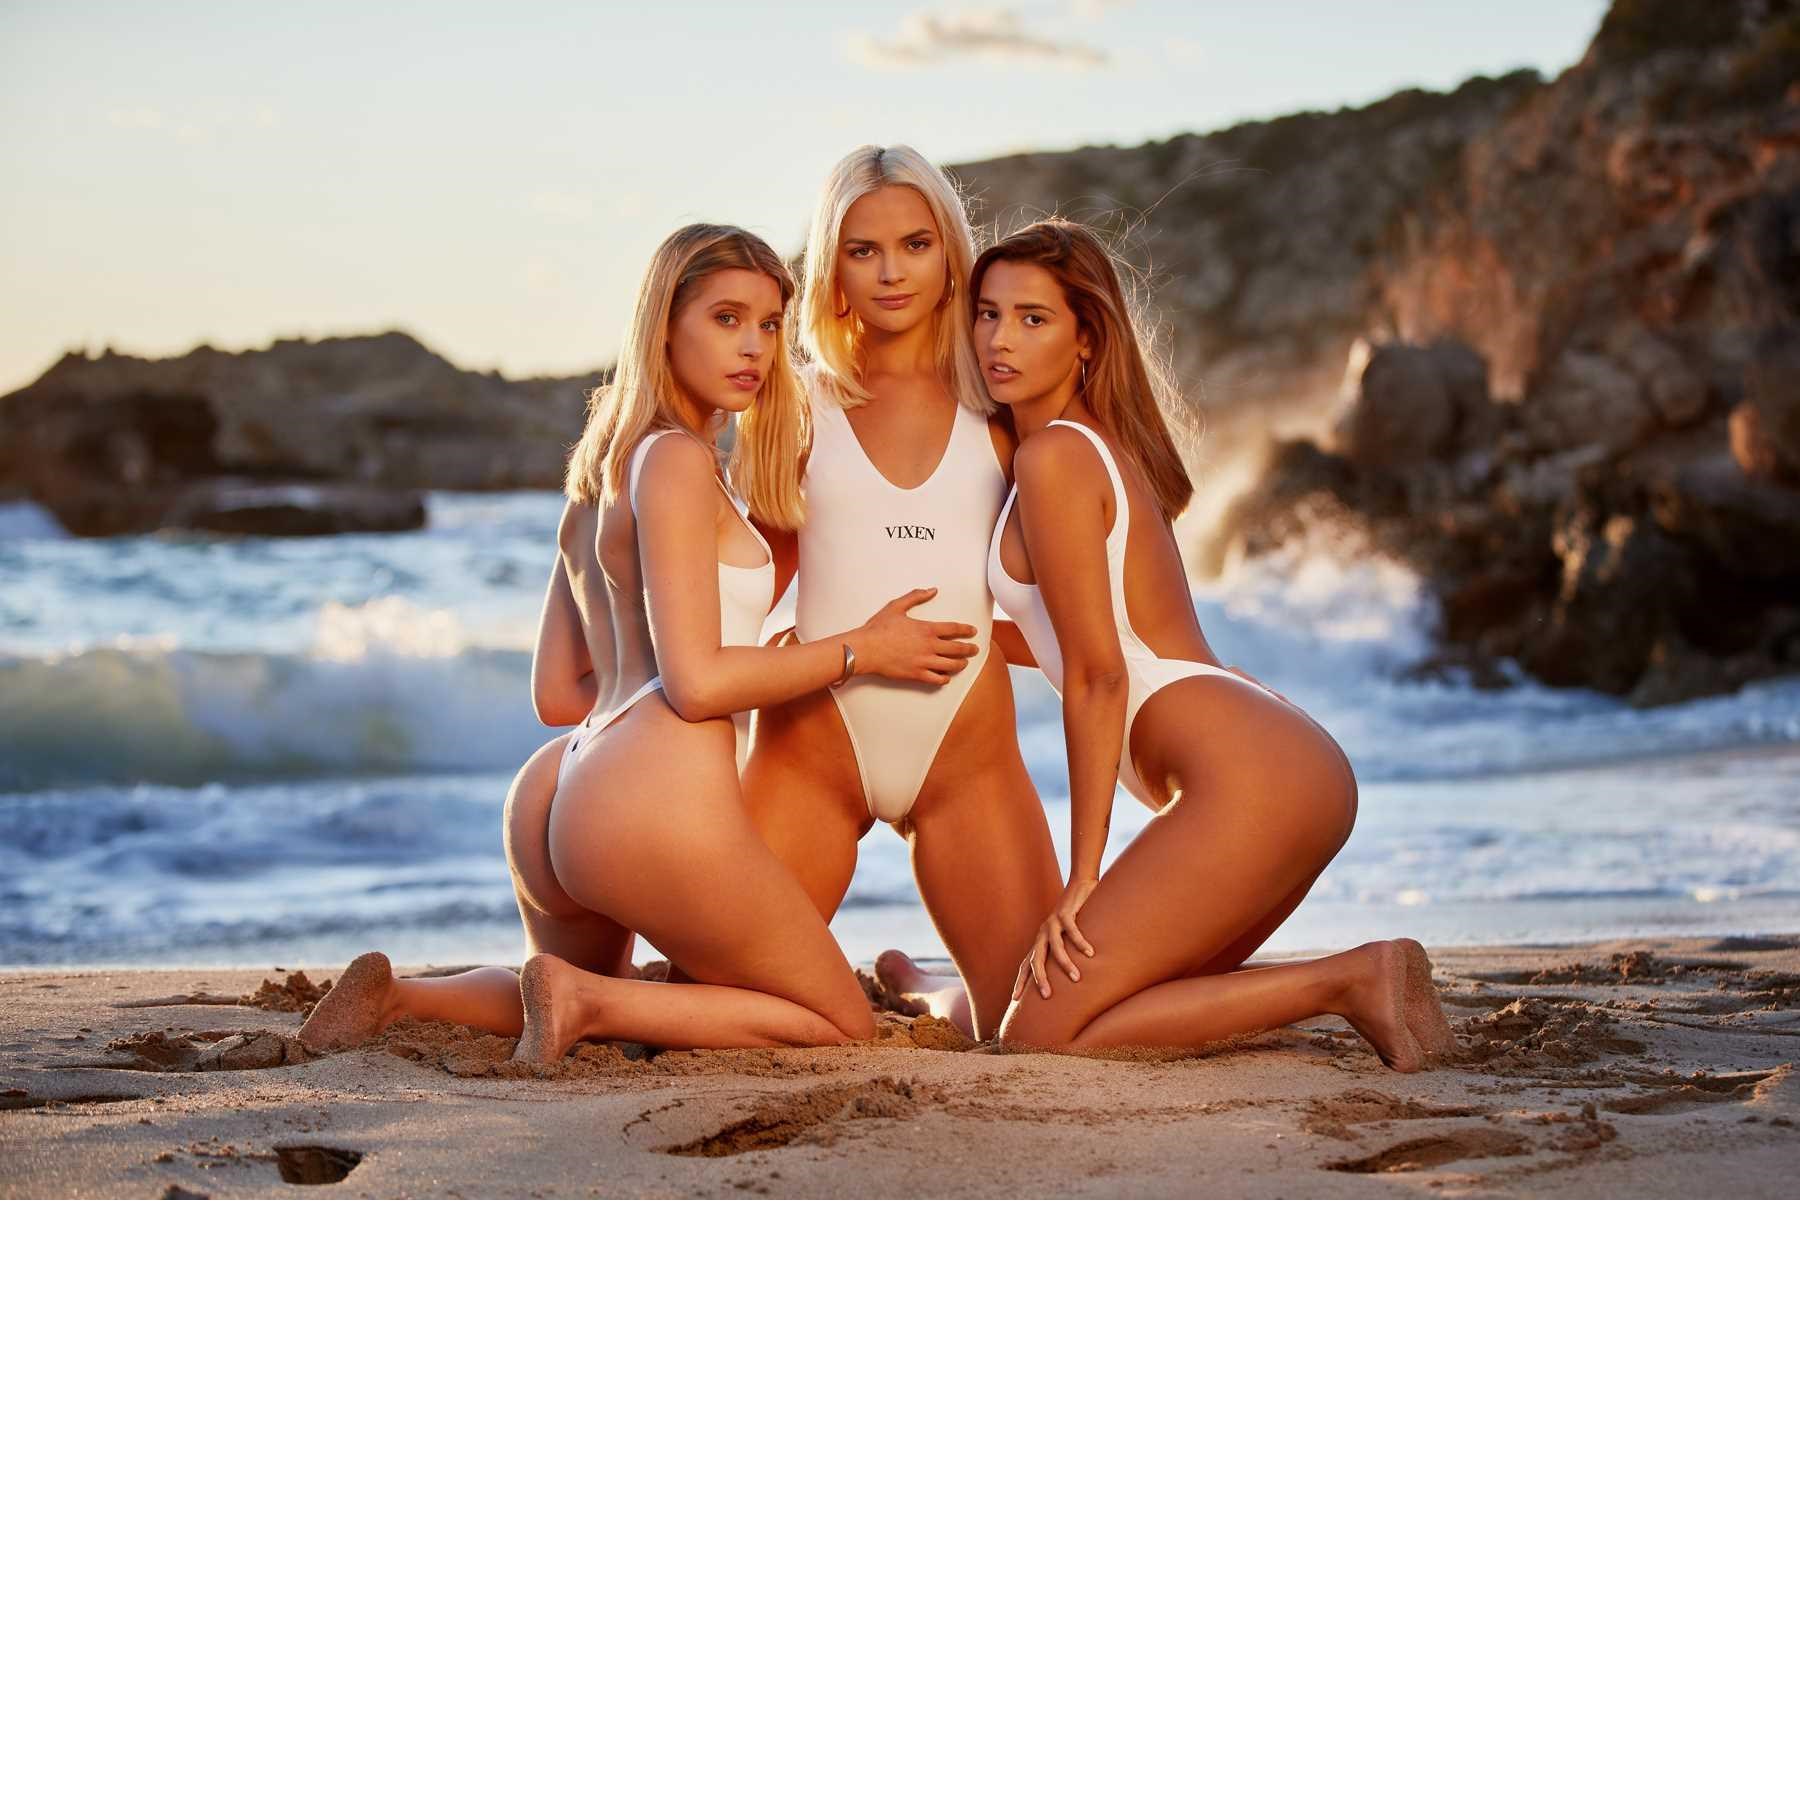 Three blonde females posed wearing swimsuits on beach